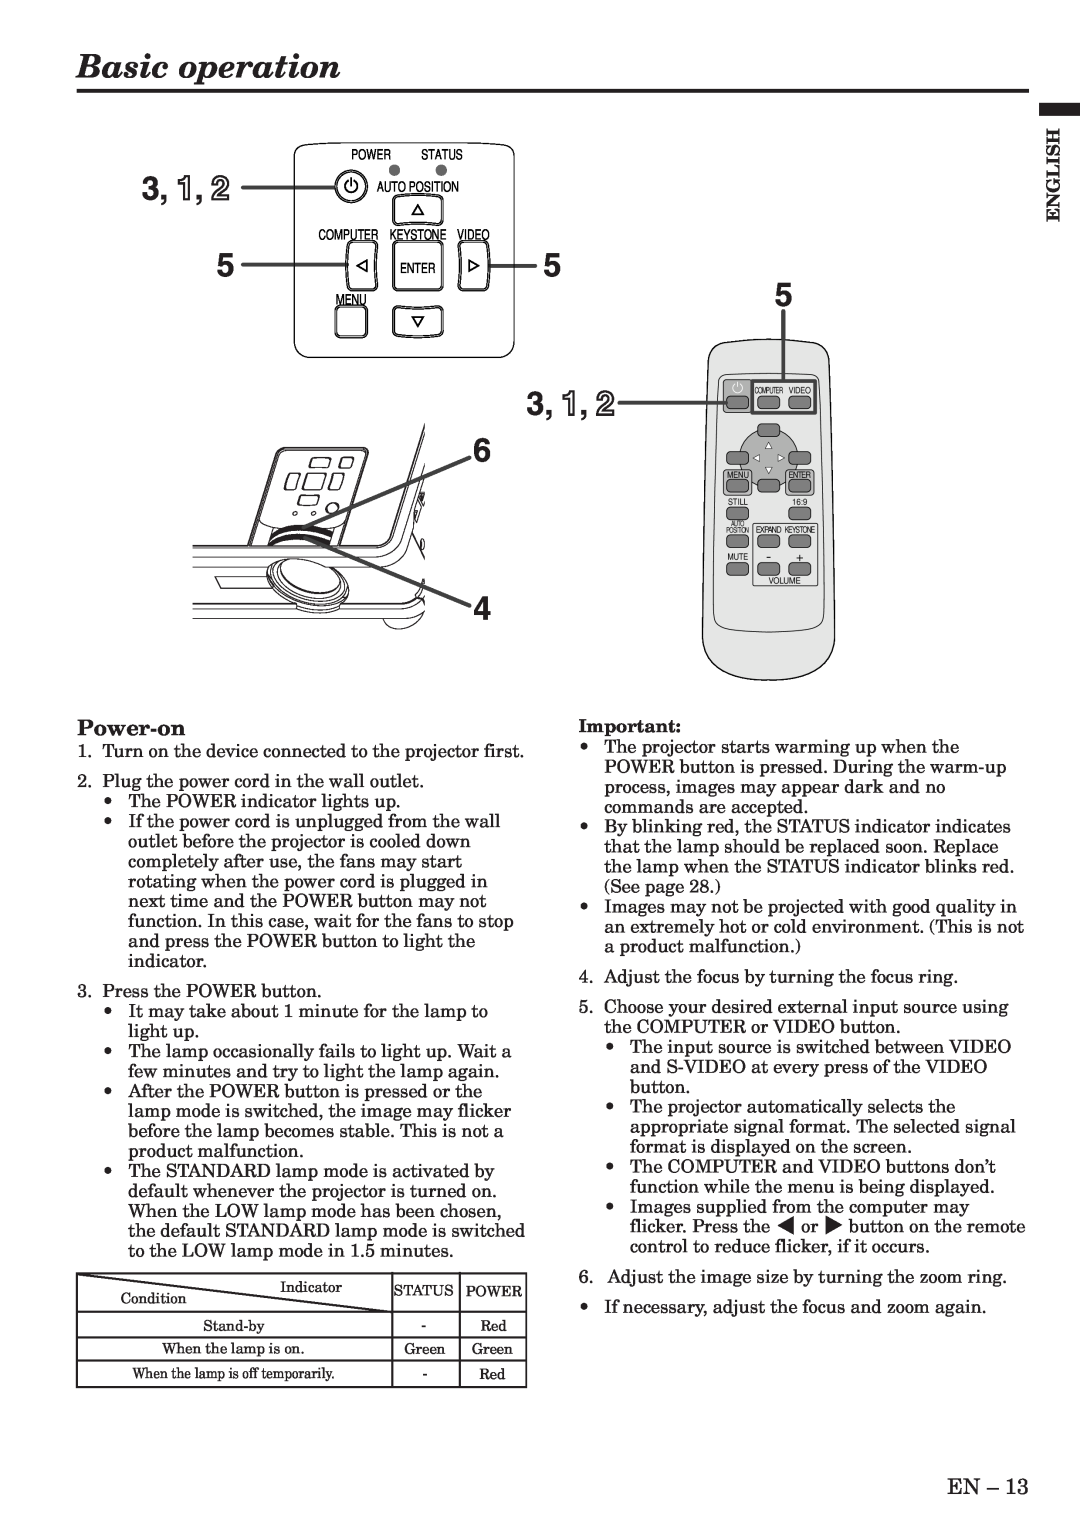 Mitsubishi Electronics XL6U user manual Basic operation, 3, 1, Power-on, When the lamp is off temporarily 